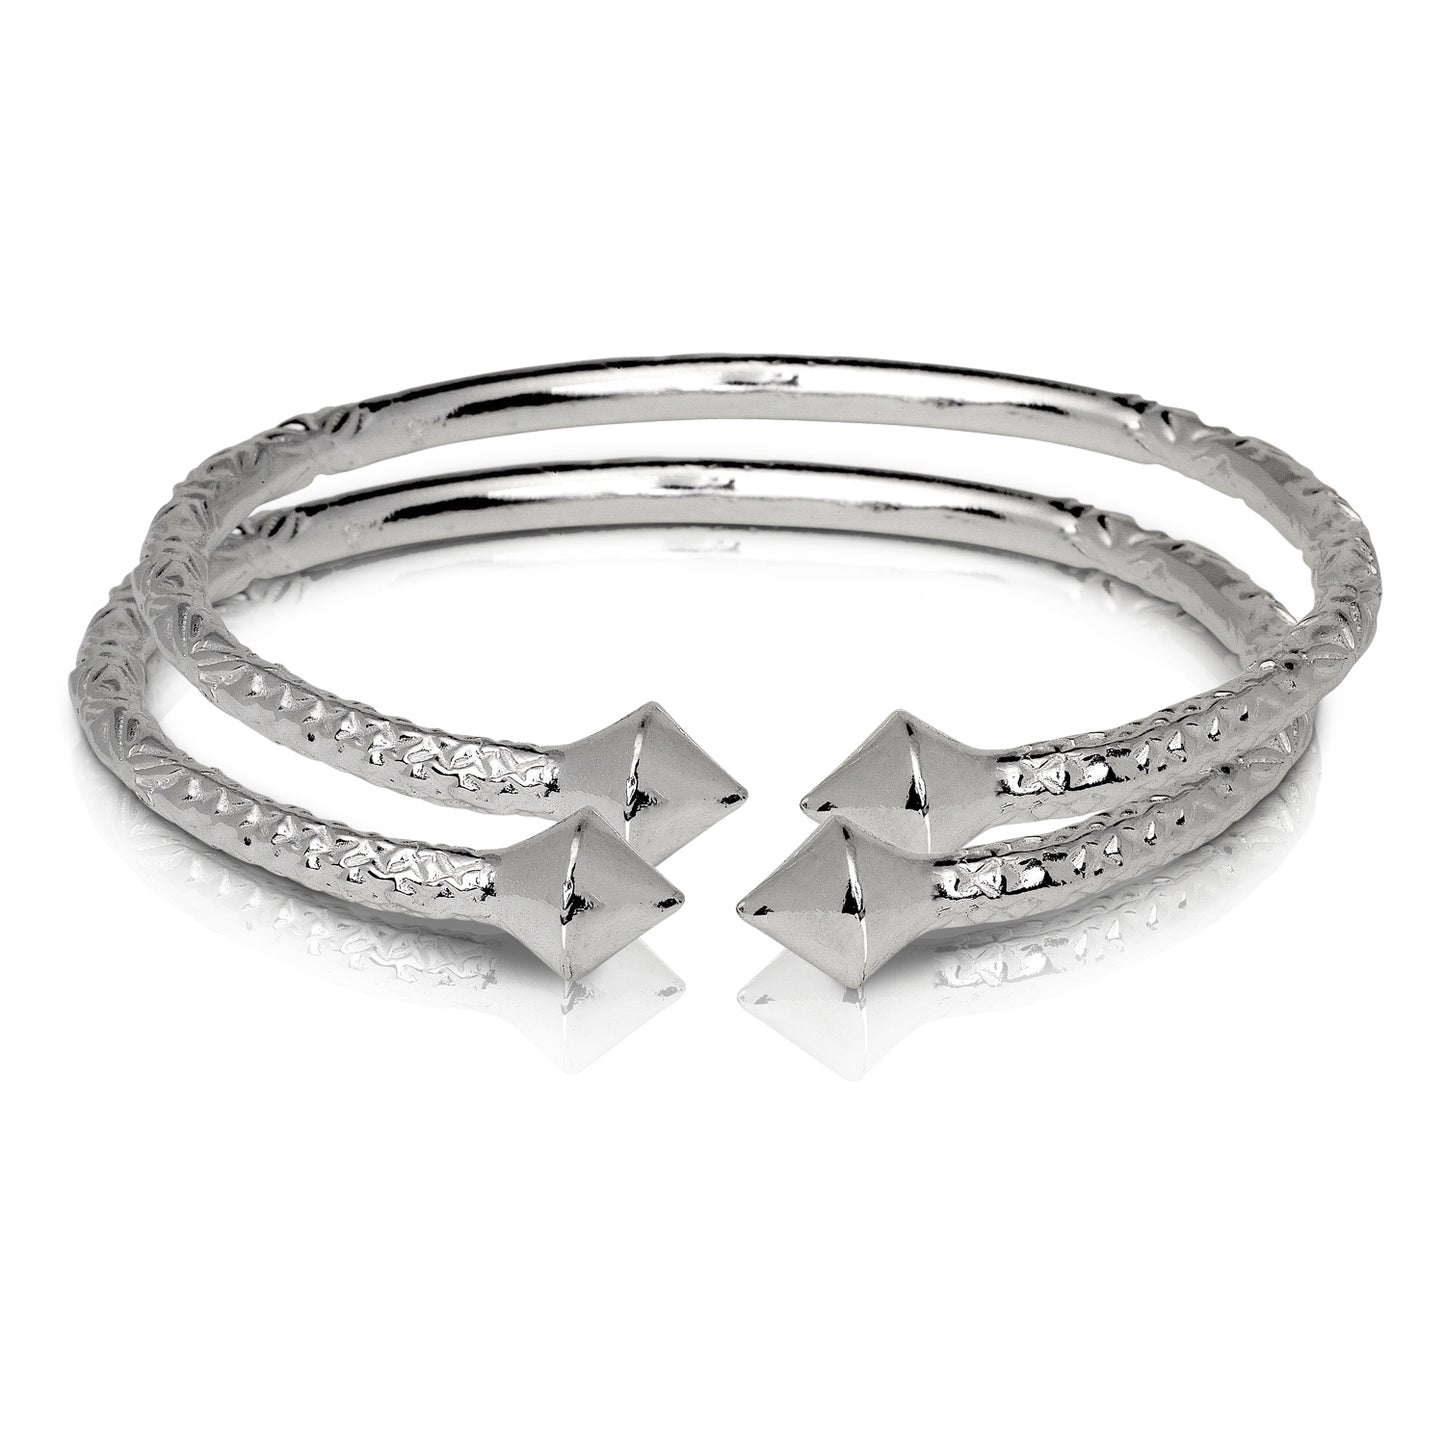 Better Jewelry Thick Pyramid Ends .925 Sterling Silver West Indian Bangles (Pair)